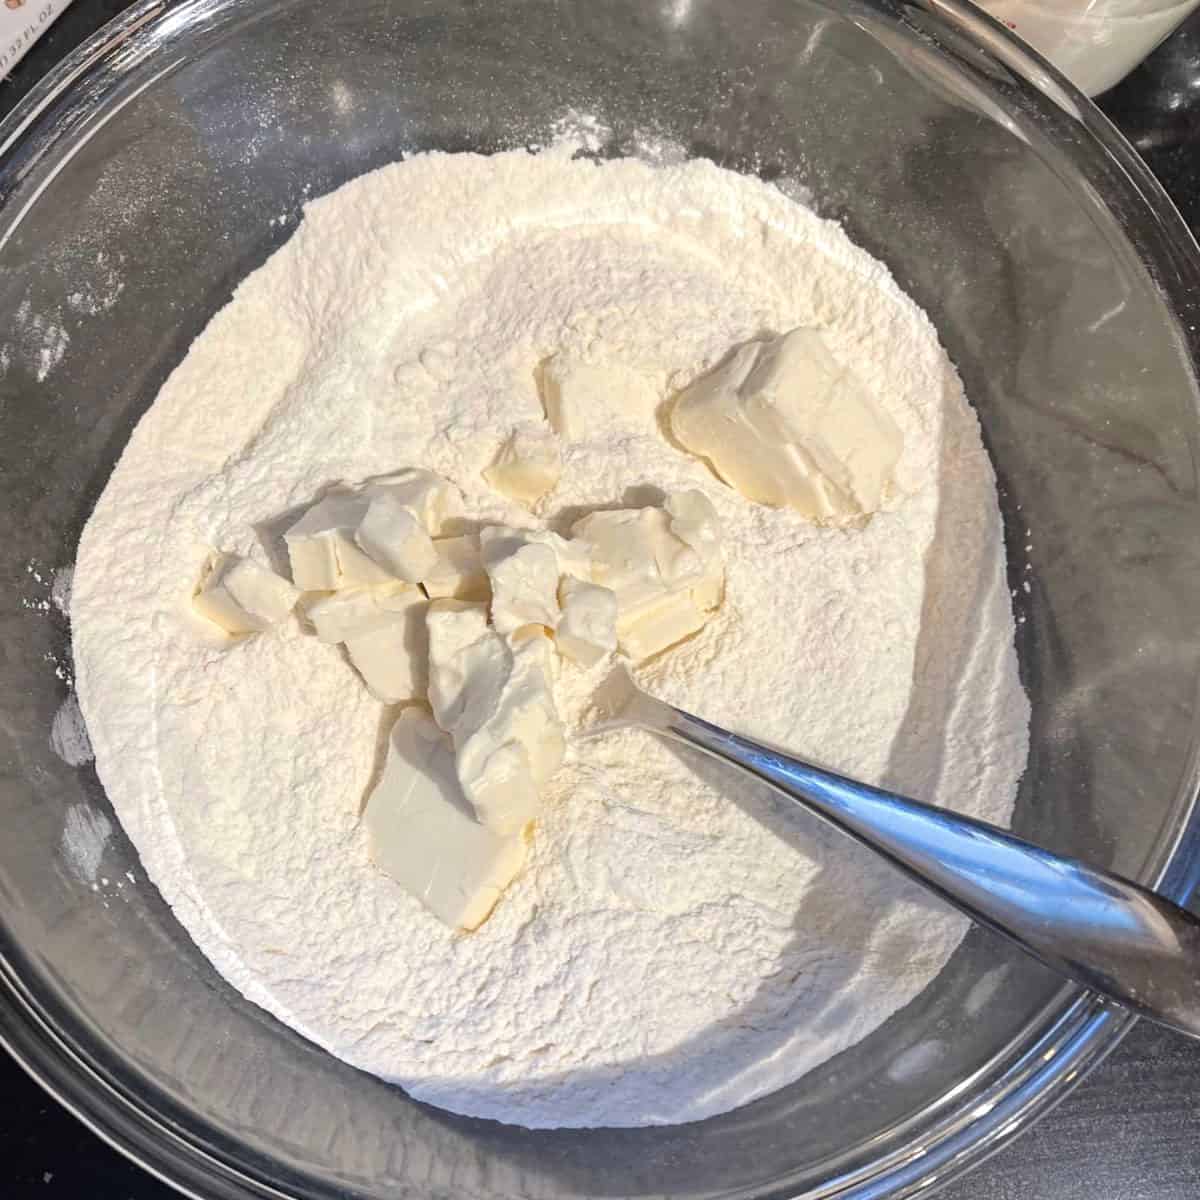 Butter added to dry ingredients for biscuits in bowl.